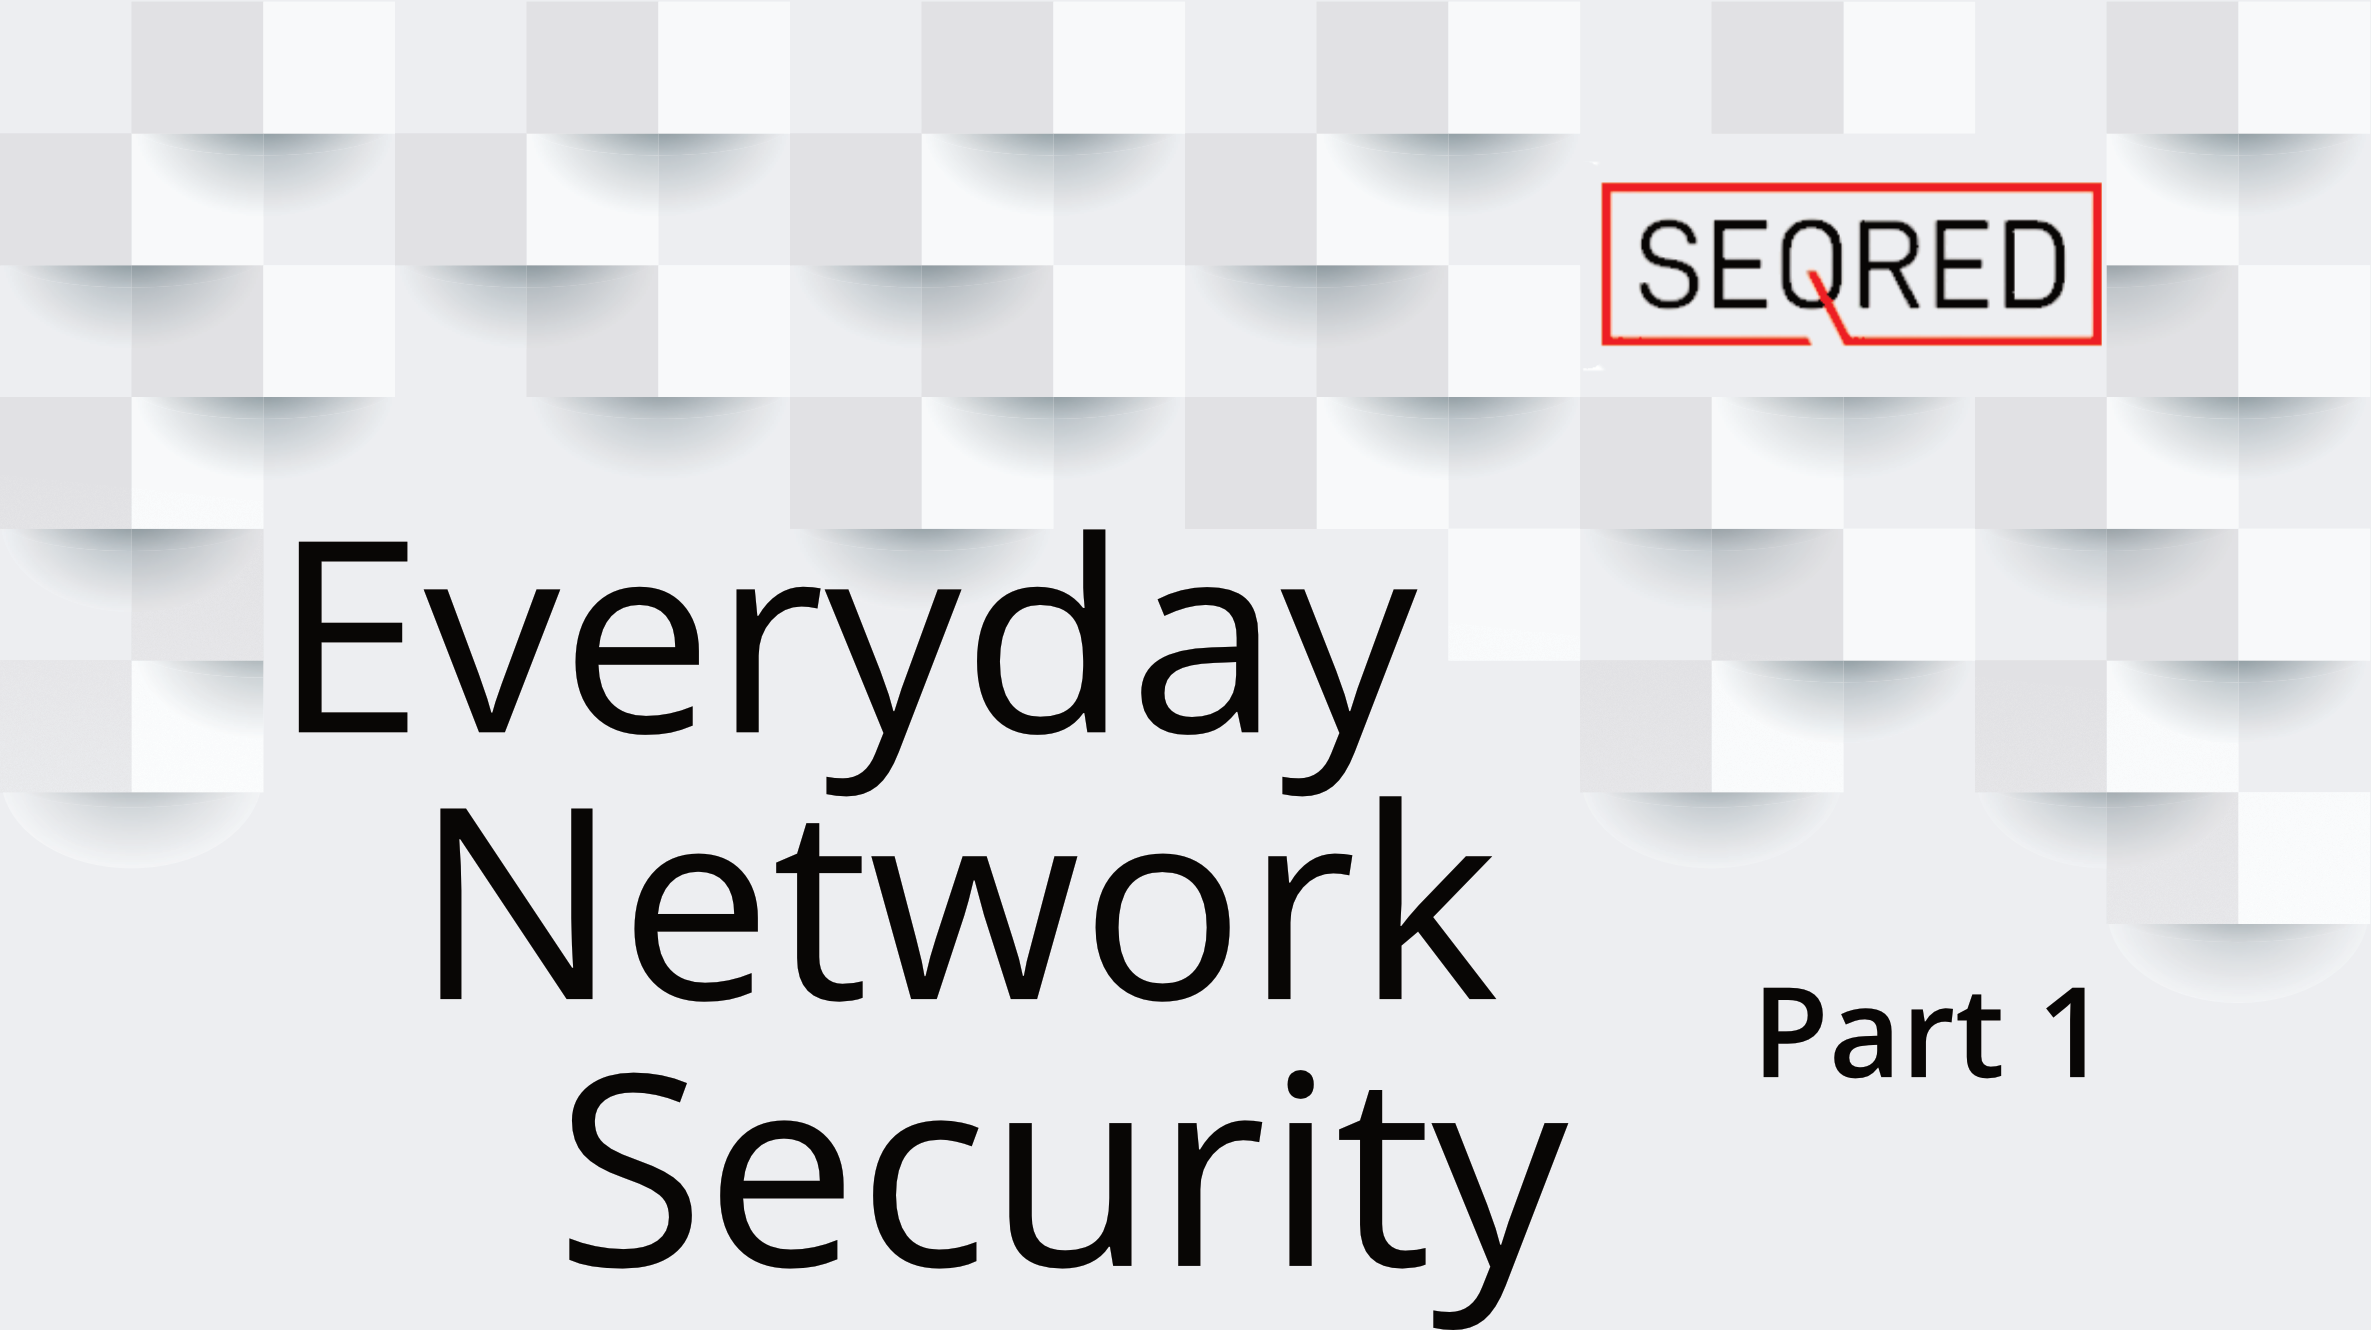 Everyday Network Security - Part 1